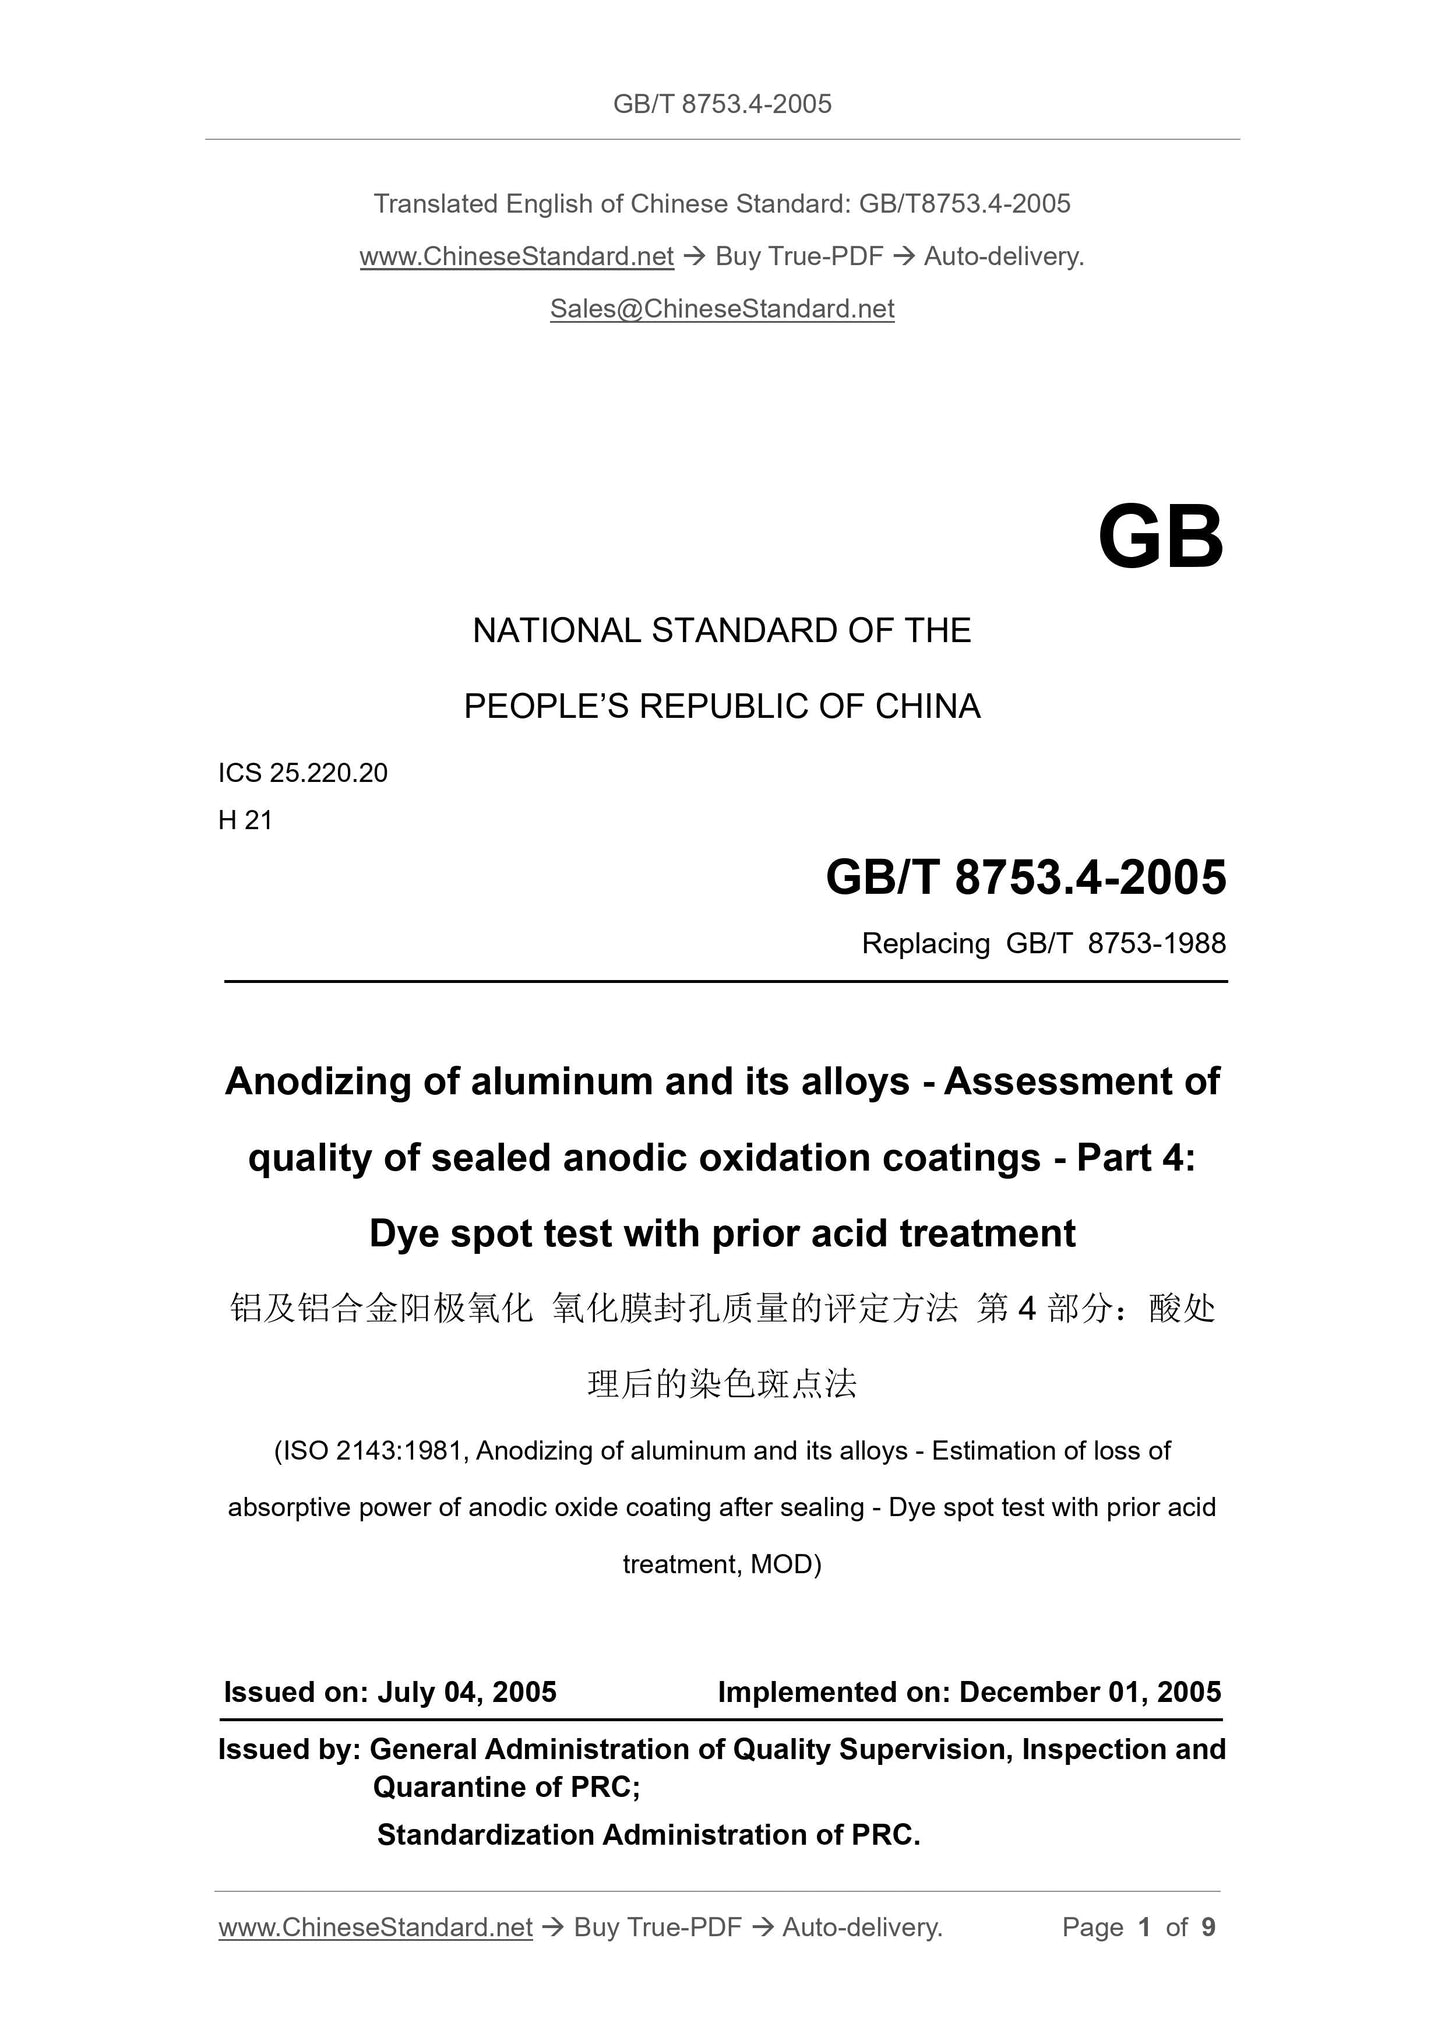 GB/T 8753.4-2005 Page 1